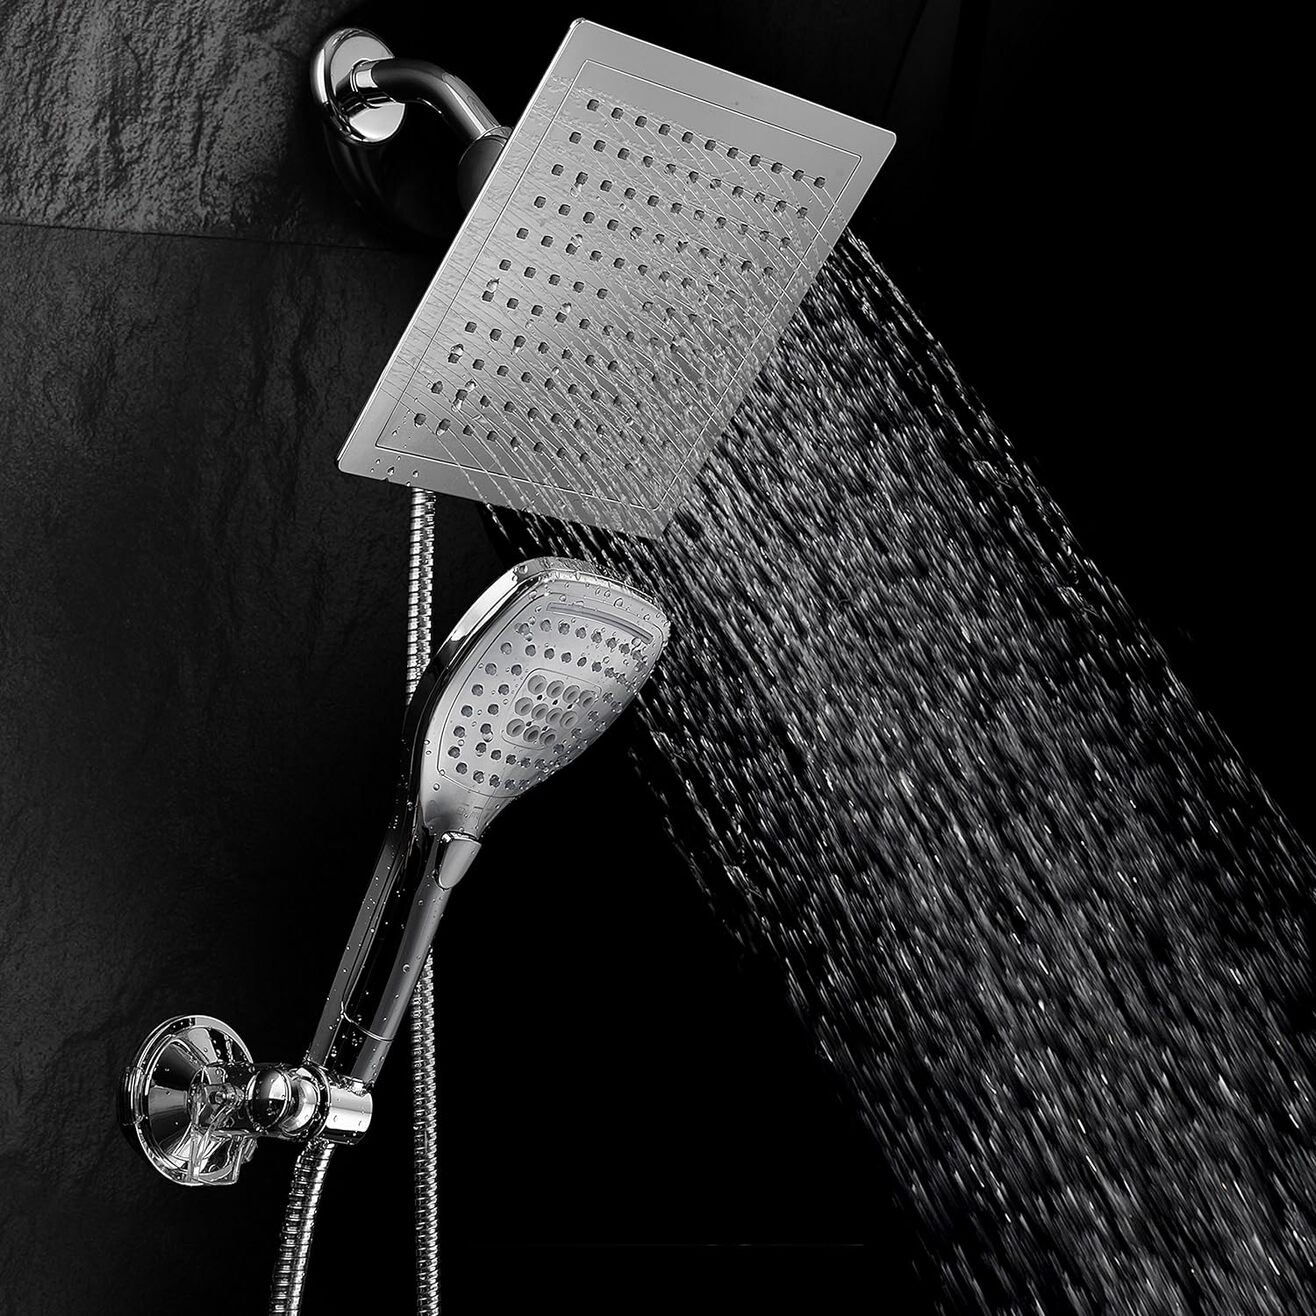 The-Best-Rain-Shower-Heads-in-2021-–-Reviews-with-Complete-Guide-TN